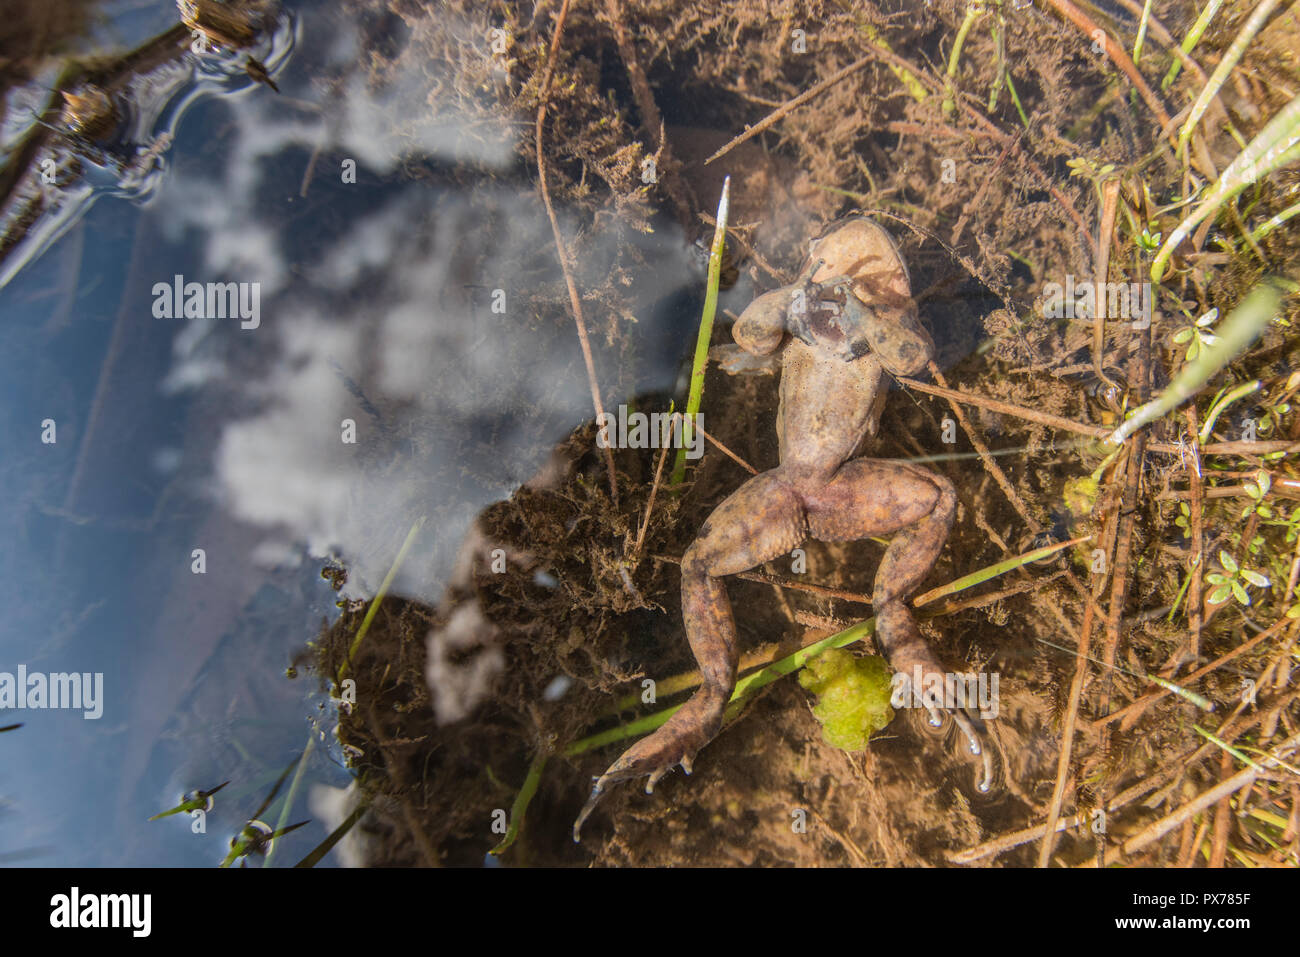 Frog Dead Body Stock Photos - 590 Images